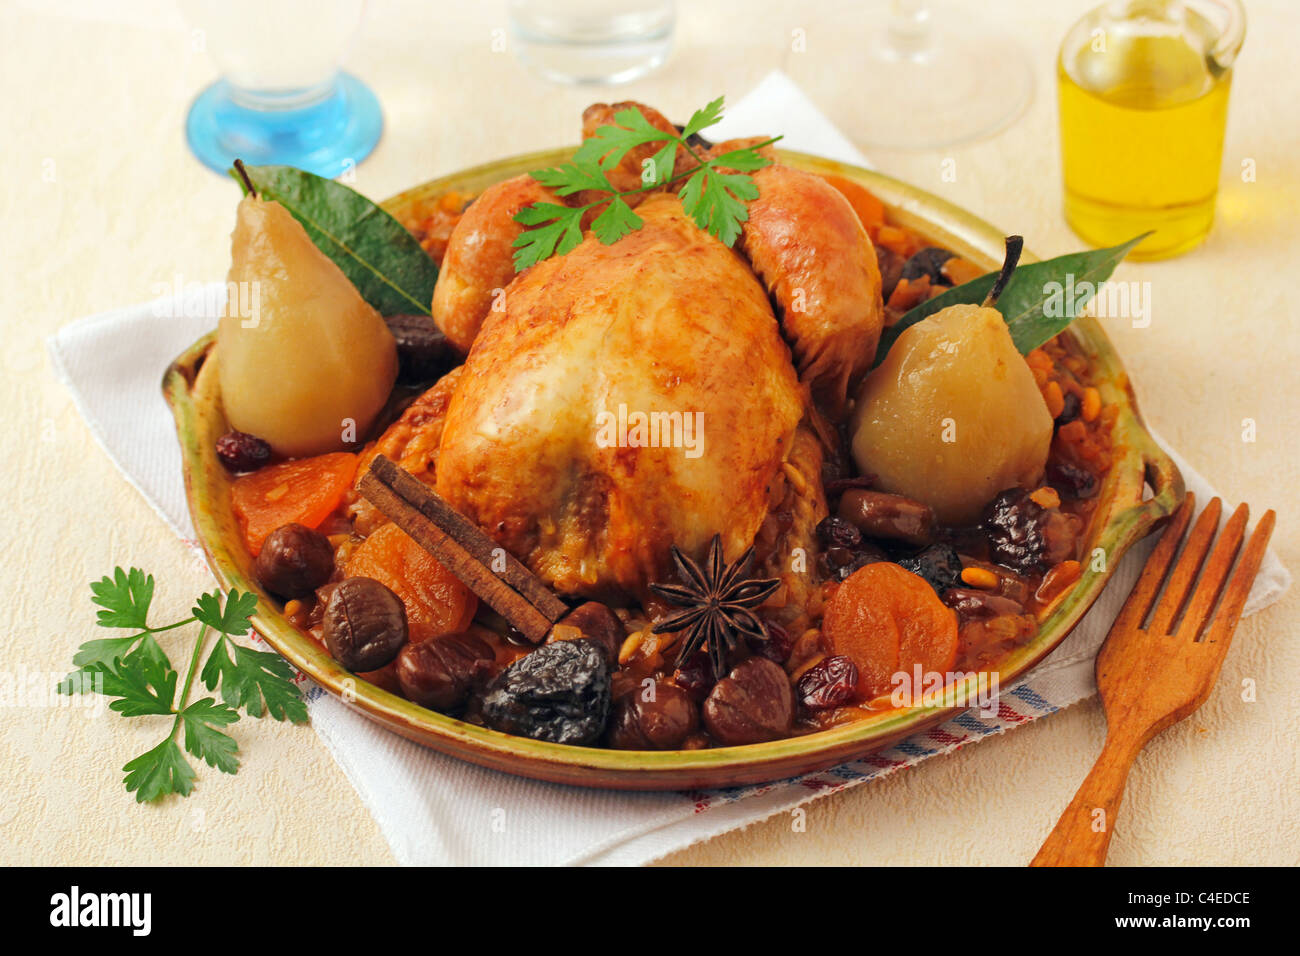 Roasted chicken with honey and nuts. Recipe available. Stock Photo